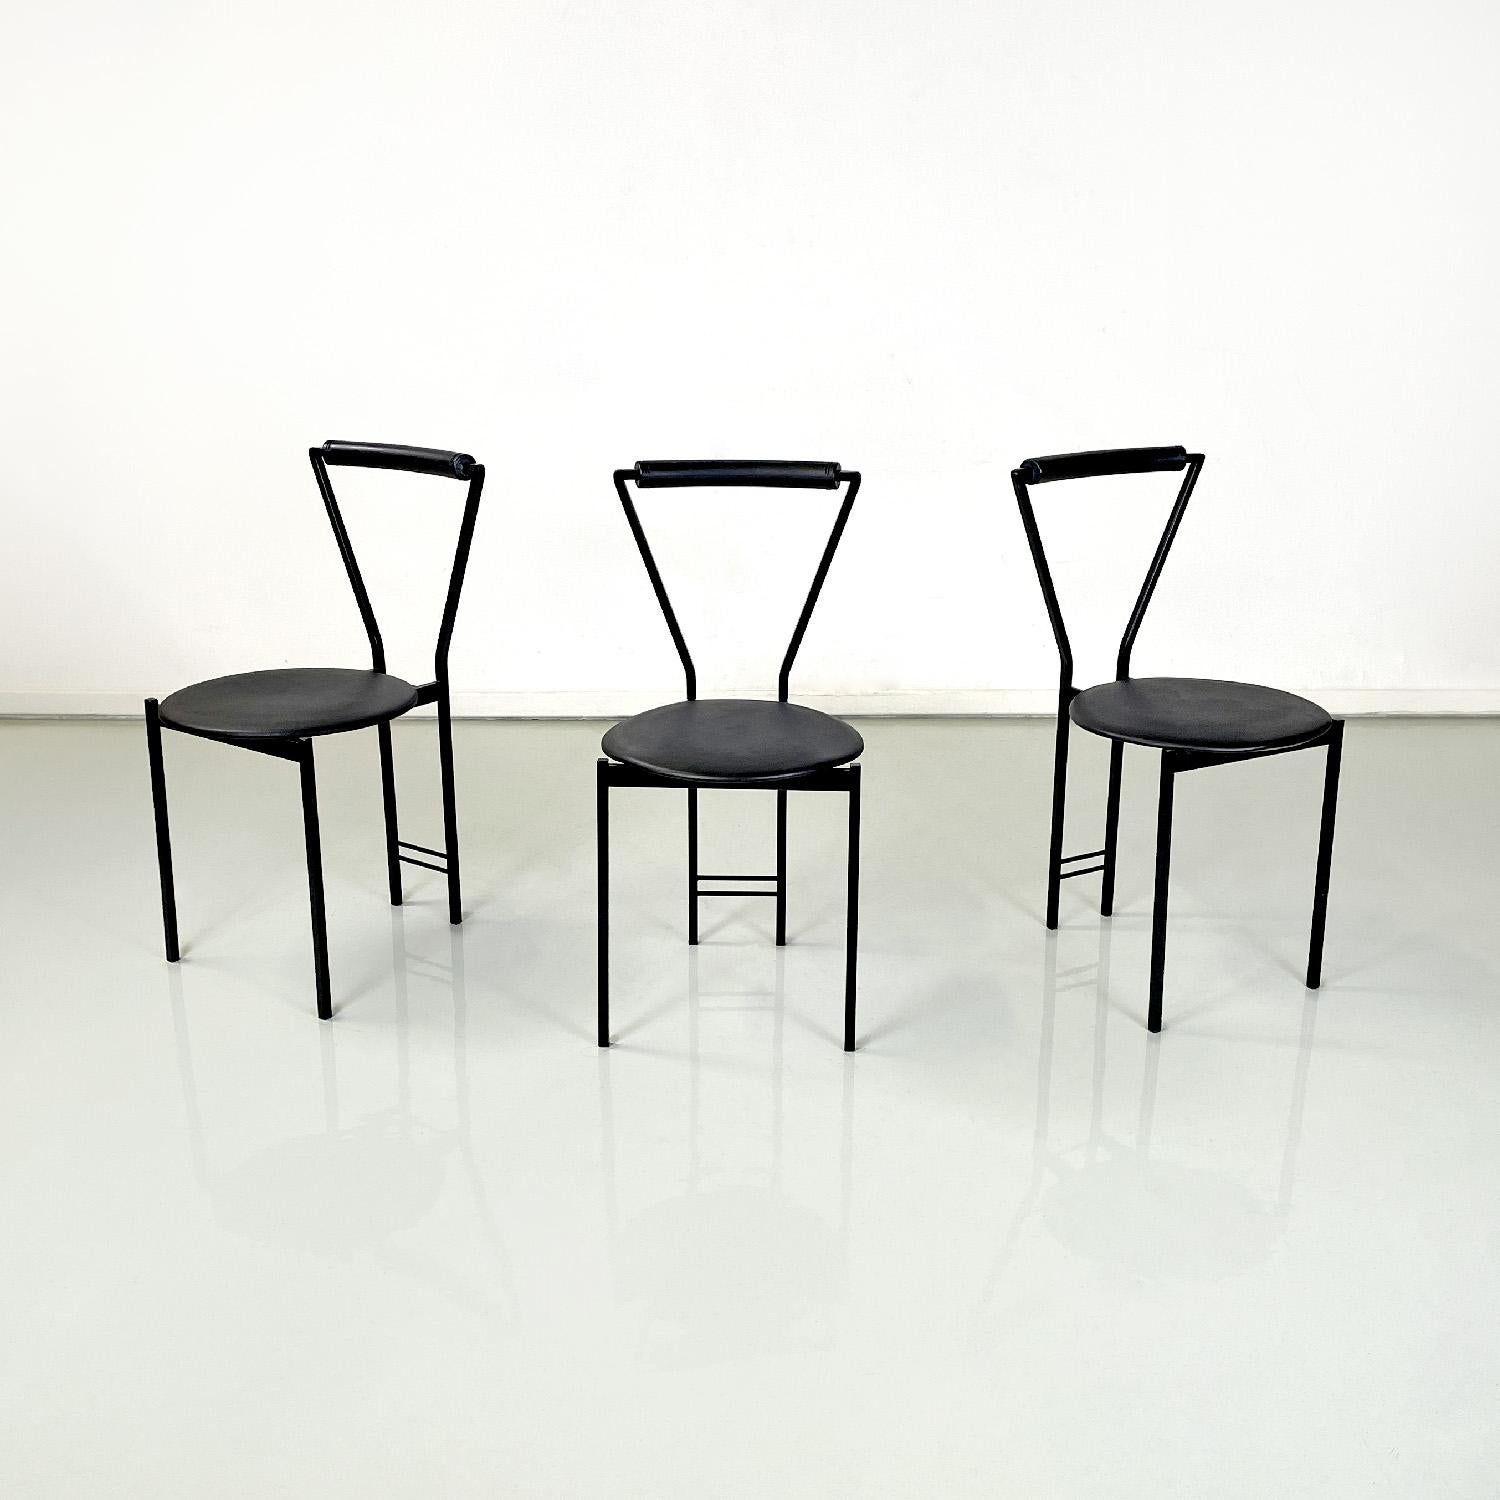 Italian modern chairs in black metal and rubber, 1980s
Set of three chairs with round seats in black rubber. The backrest is composed of a black painted metal structure with a square section and a triangular shape, wrapped at the top by a black